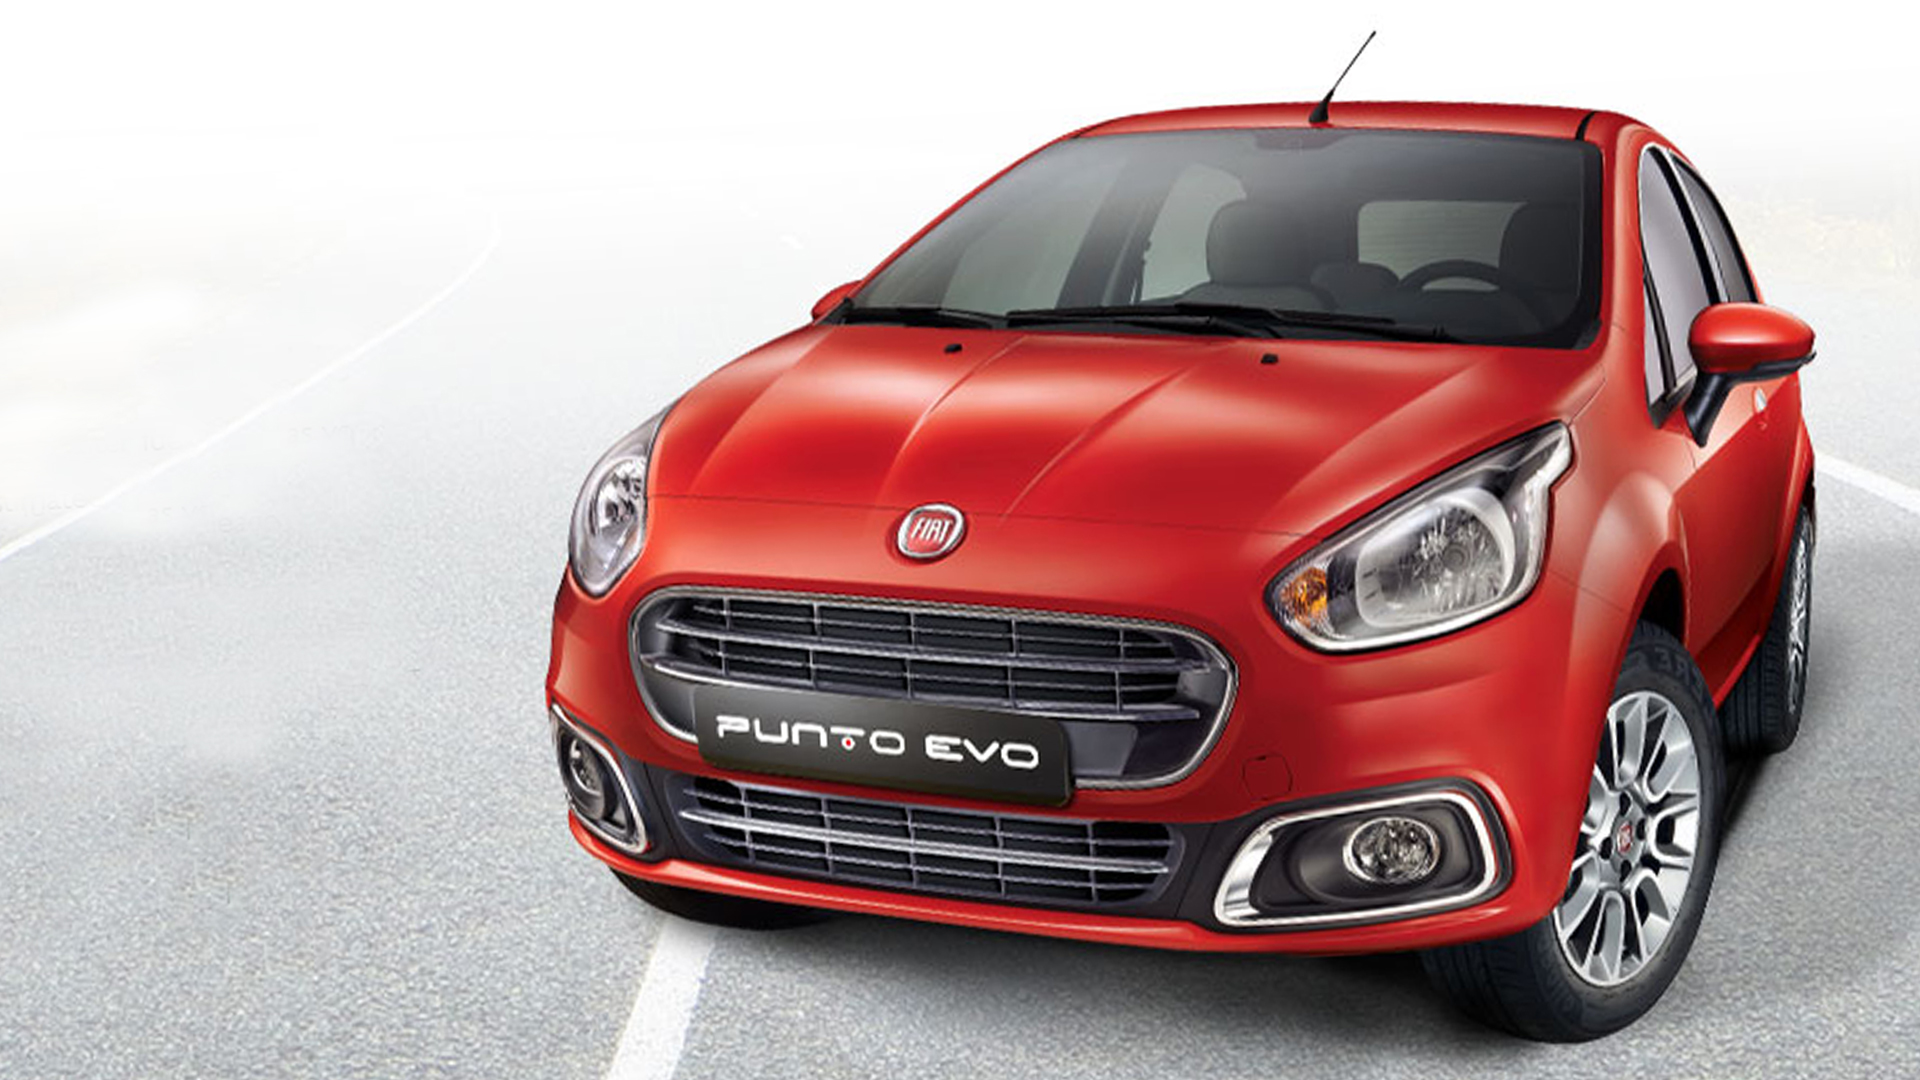 Fiat Punto Evo PowerTech 2016 1.3 Dynamic Diesel - Price in India, Mileage,  Reviews, Colours, Specification, Images - Overdrive